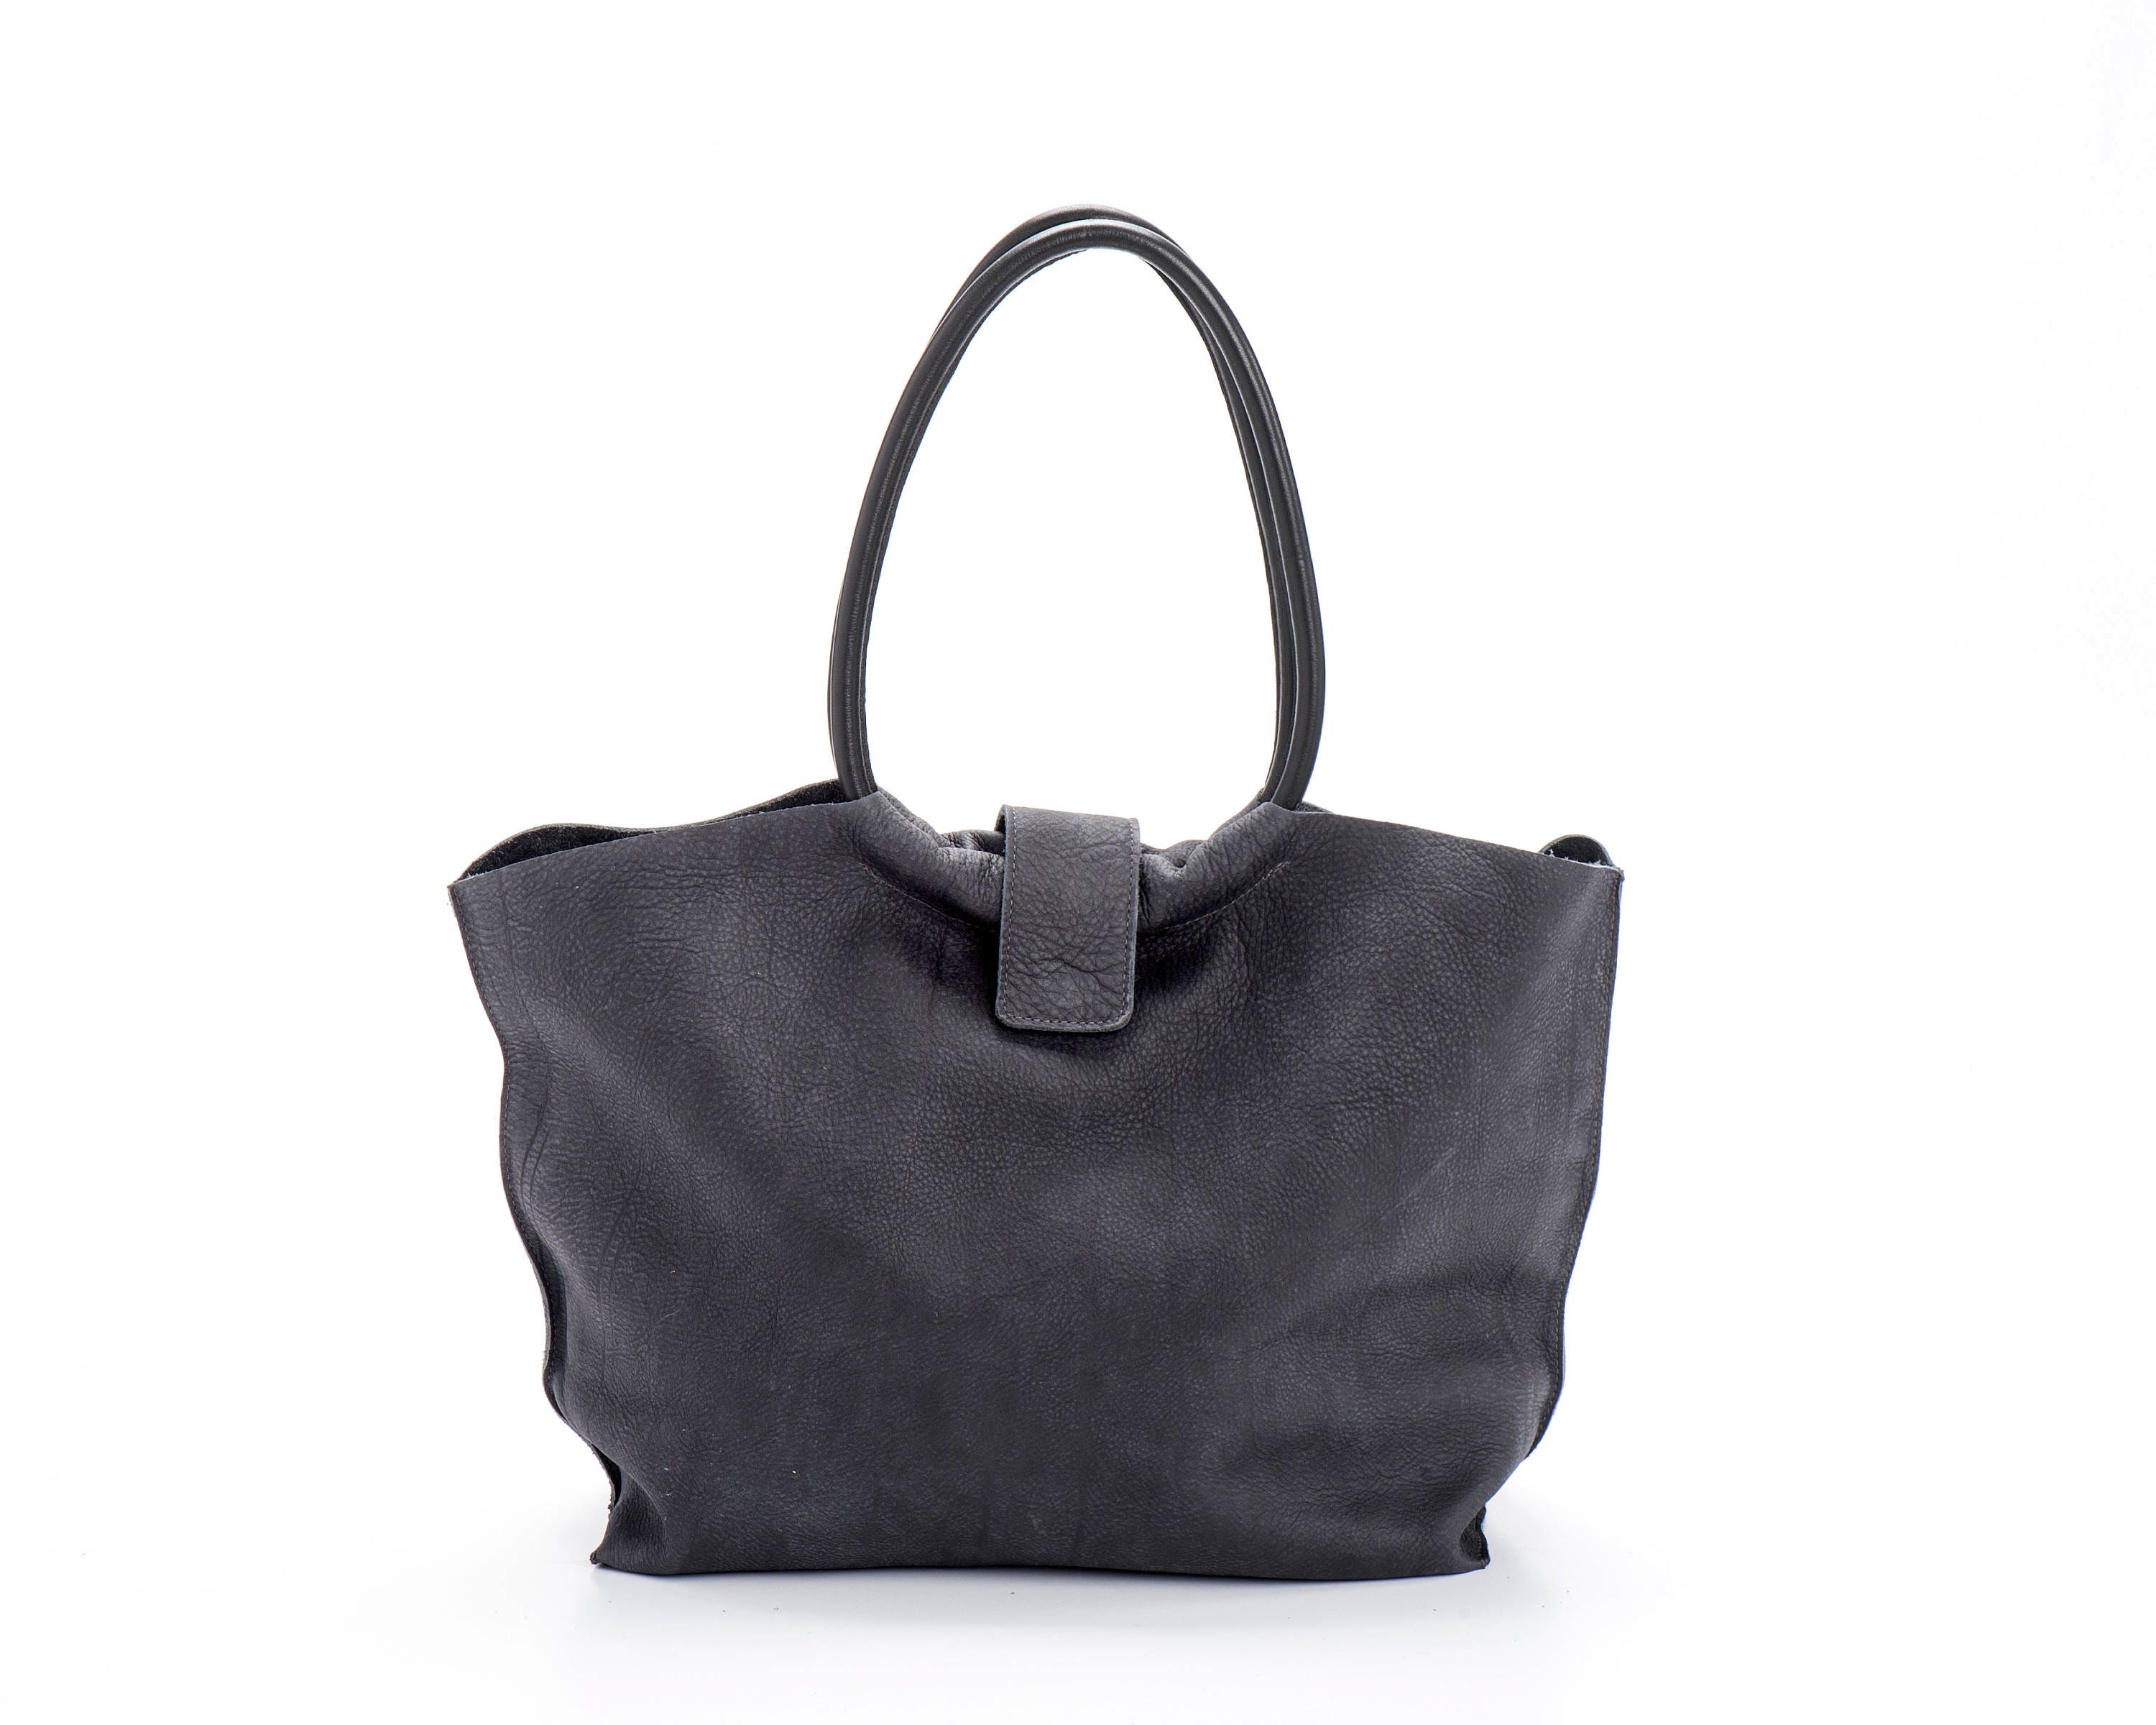 Handmade leather bags Black leather bag Soft leather tote